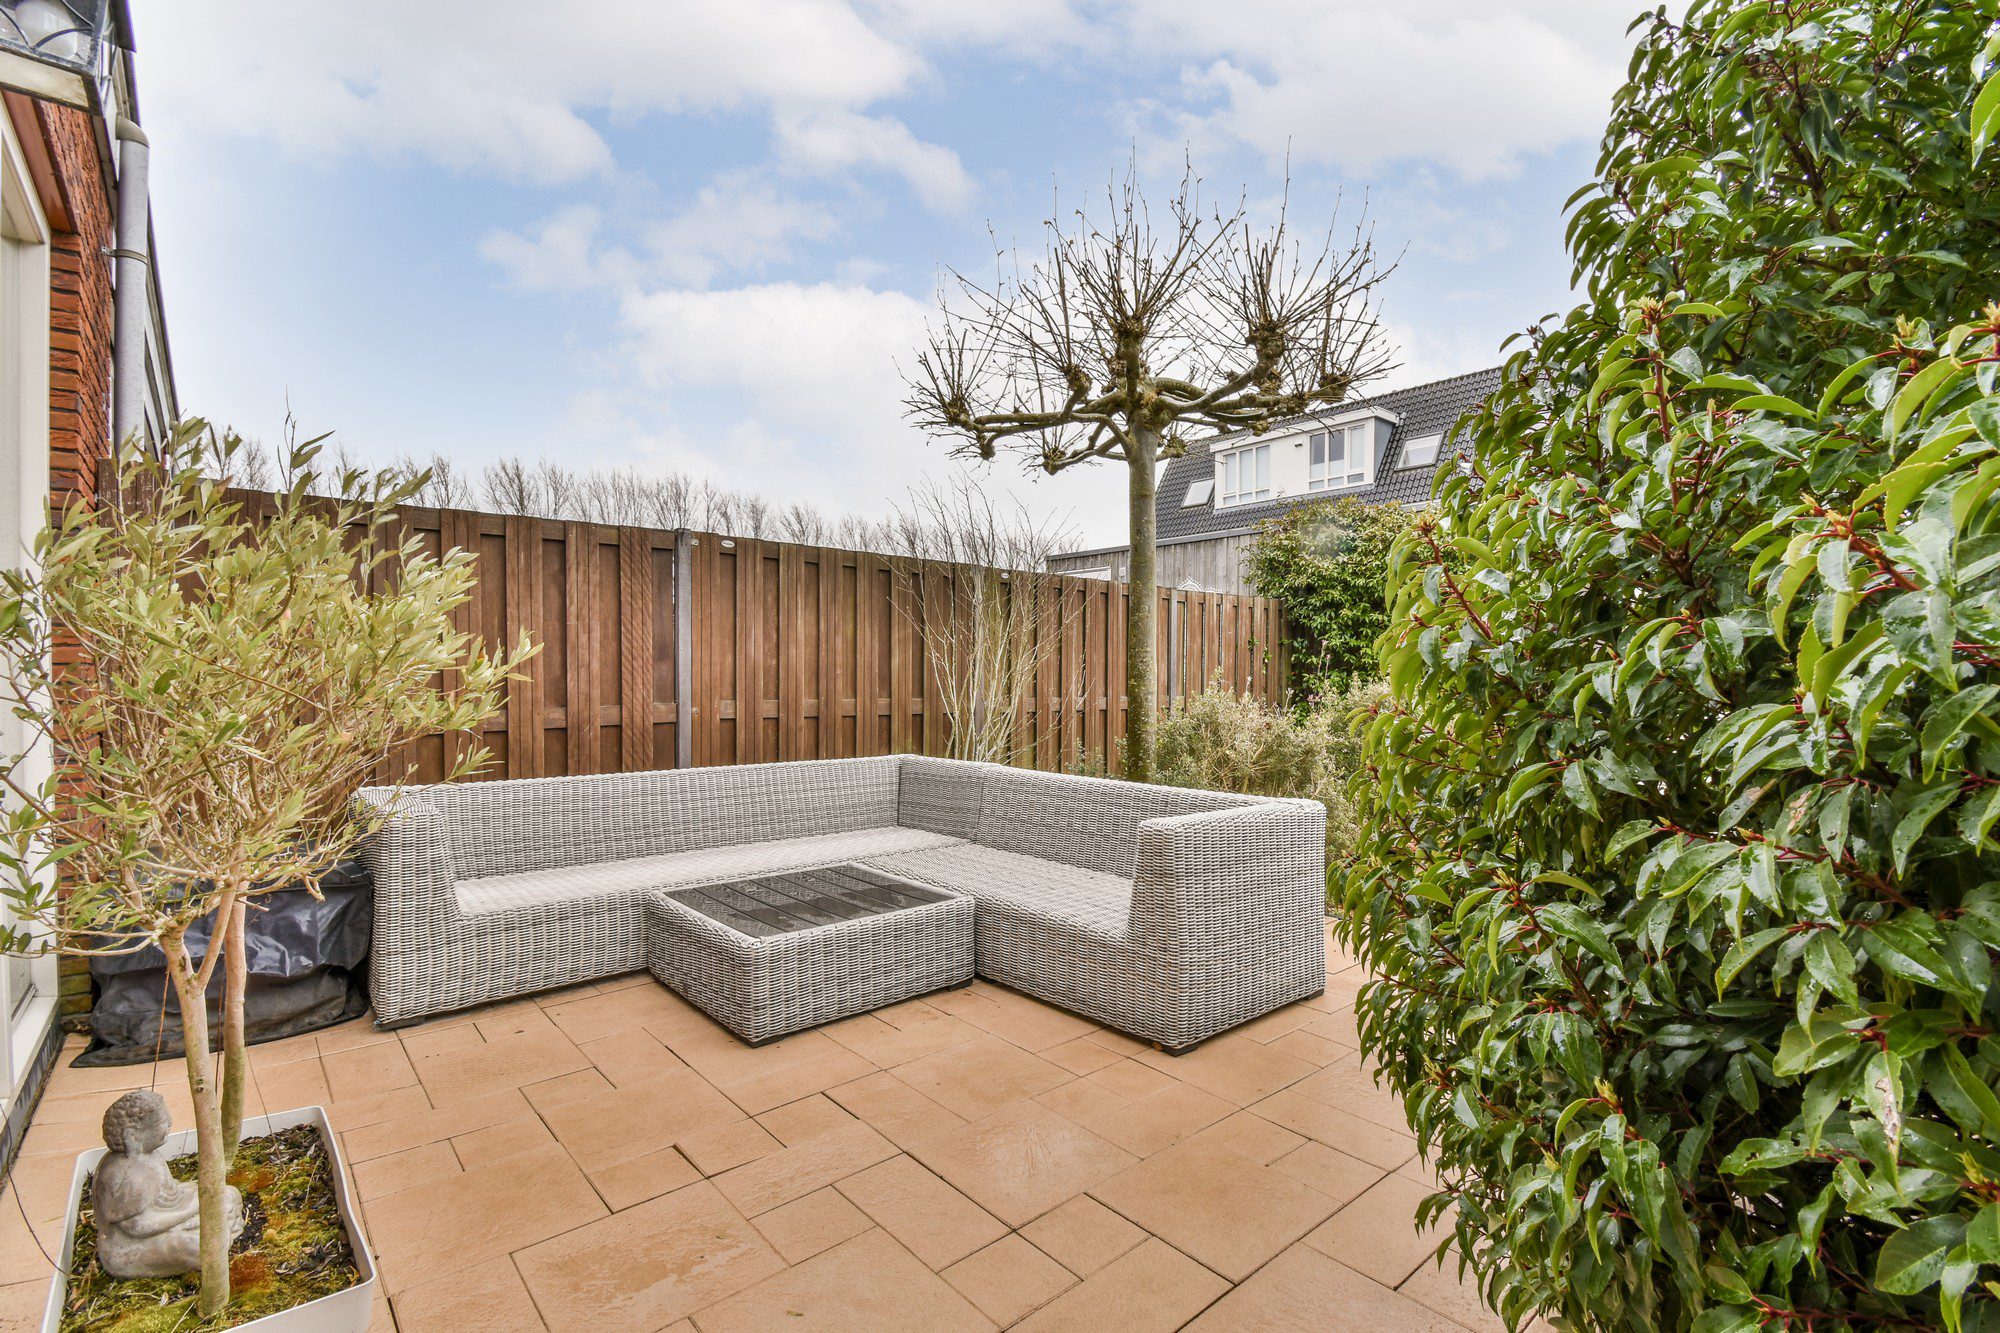 This image shows a residential backyard patio area. There is a modern outdoor wicker lounge set with cushions, including a sofa and a matching table. The area is surrounded by an assortment of vegetation: potted plants, including an olive tree on the left, and a lush green bush on the right. A wooden fence encloses the space, providing privacy. Behind the fence, you can see the tops of houses, suggesting a typical suburban neighborhood. There is a deciduous tree with bare branches indicating that the season could be either late fall or winter. The sky is partially cloudy, and the patio floor is made of large square tiles. A small statue figure is situated at the base of the olive tree, adding a decorative element to the setting.